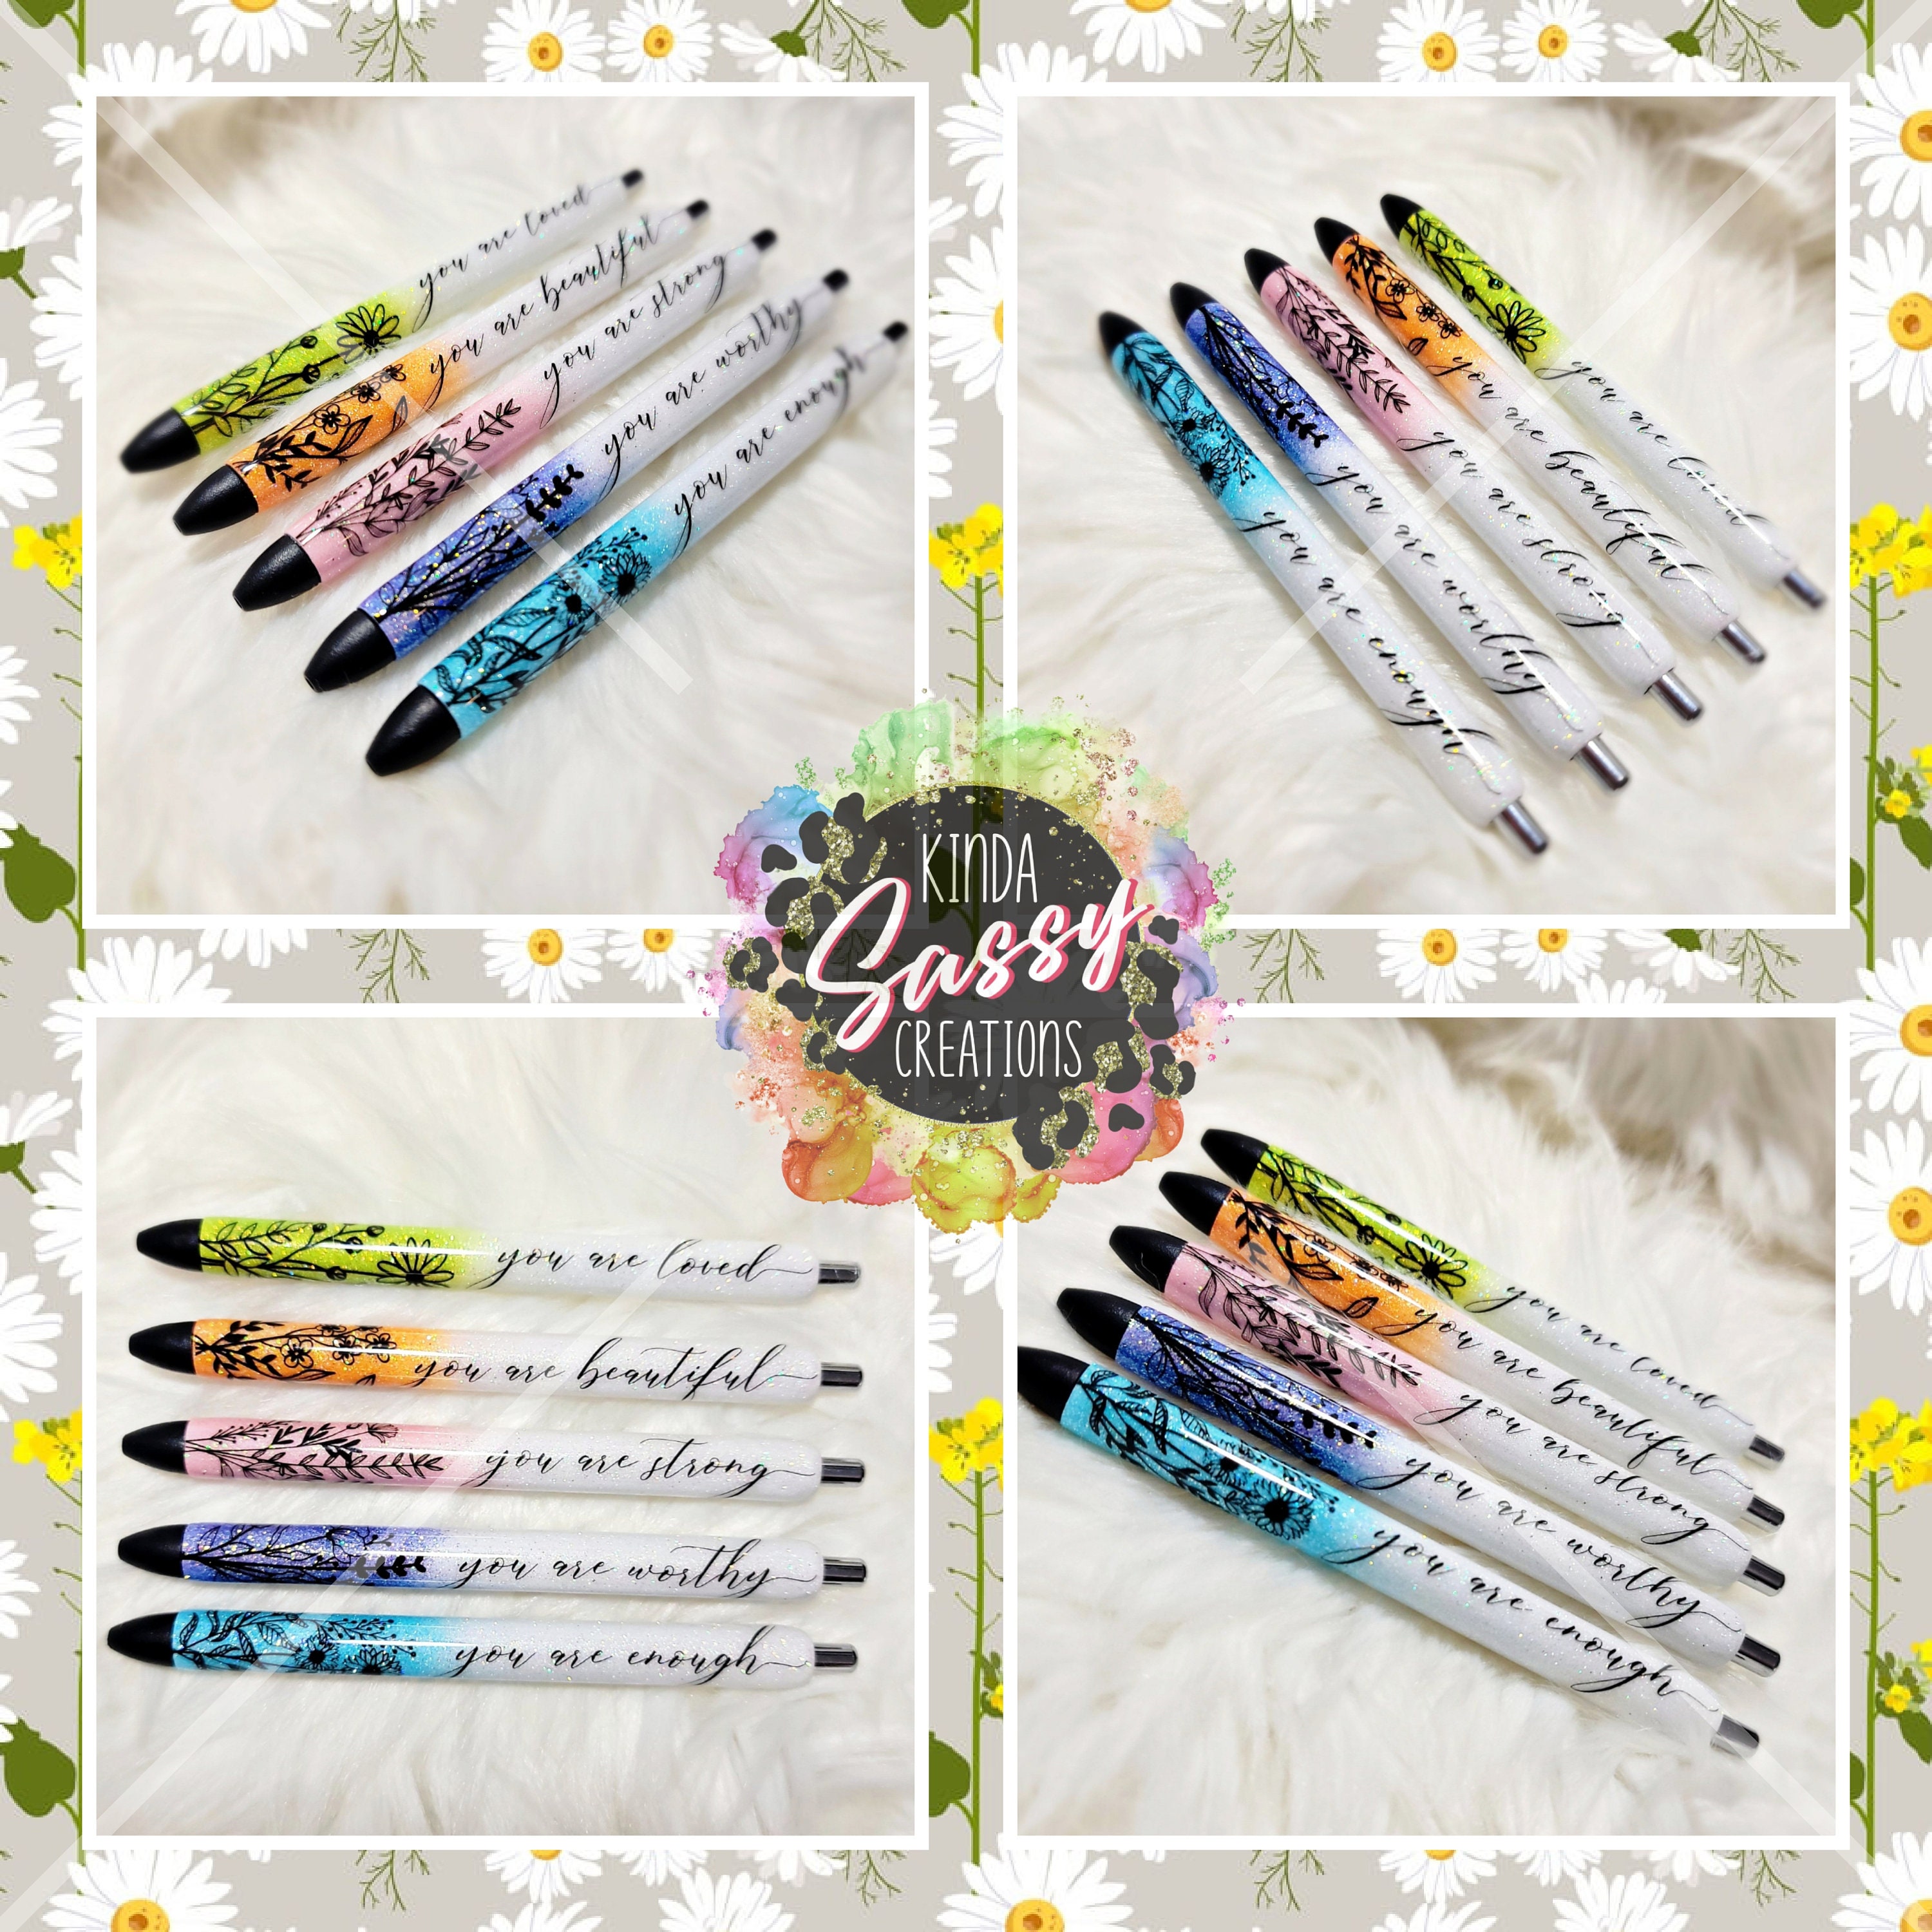 MESMOS Fancy Pens, Christian Gifts, Religious Gifts for Women, Cute Pens,  Nurse Gifts for Women, Journaling Ballpoint Pens, Cool Pens